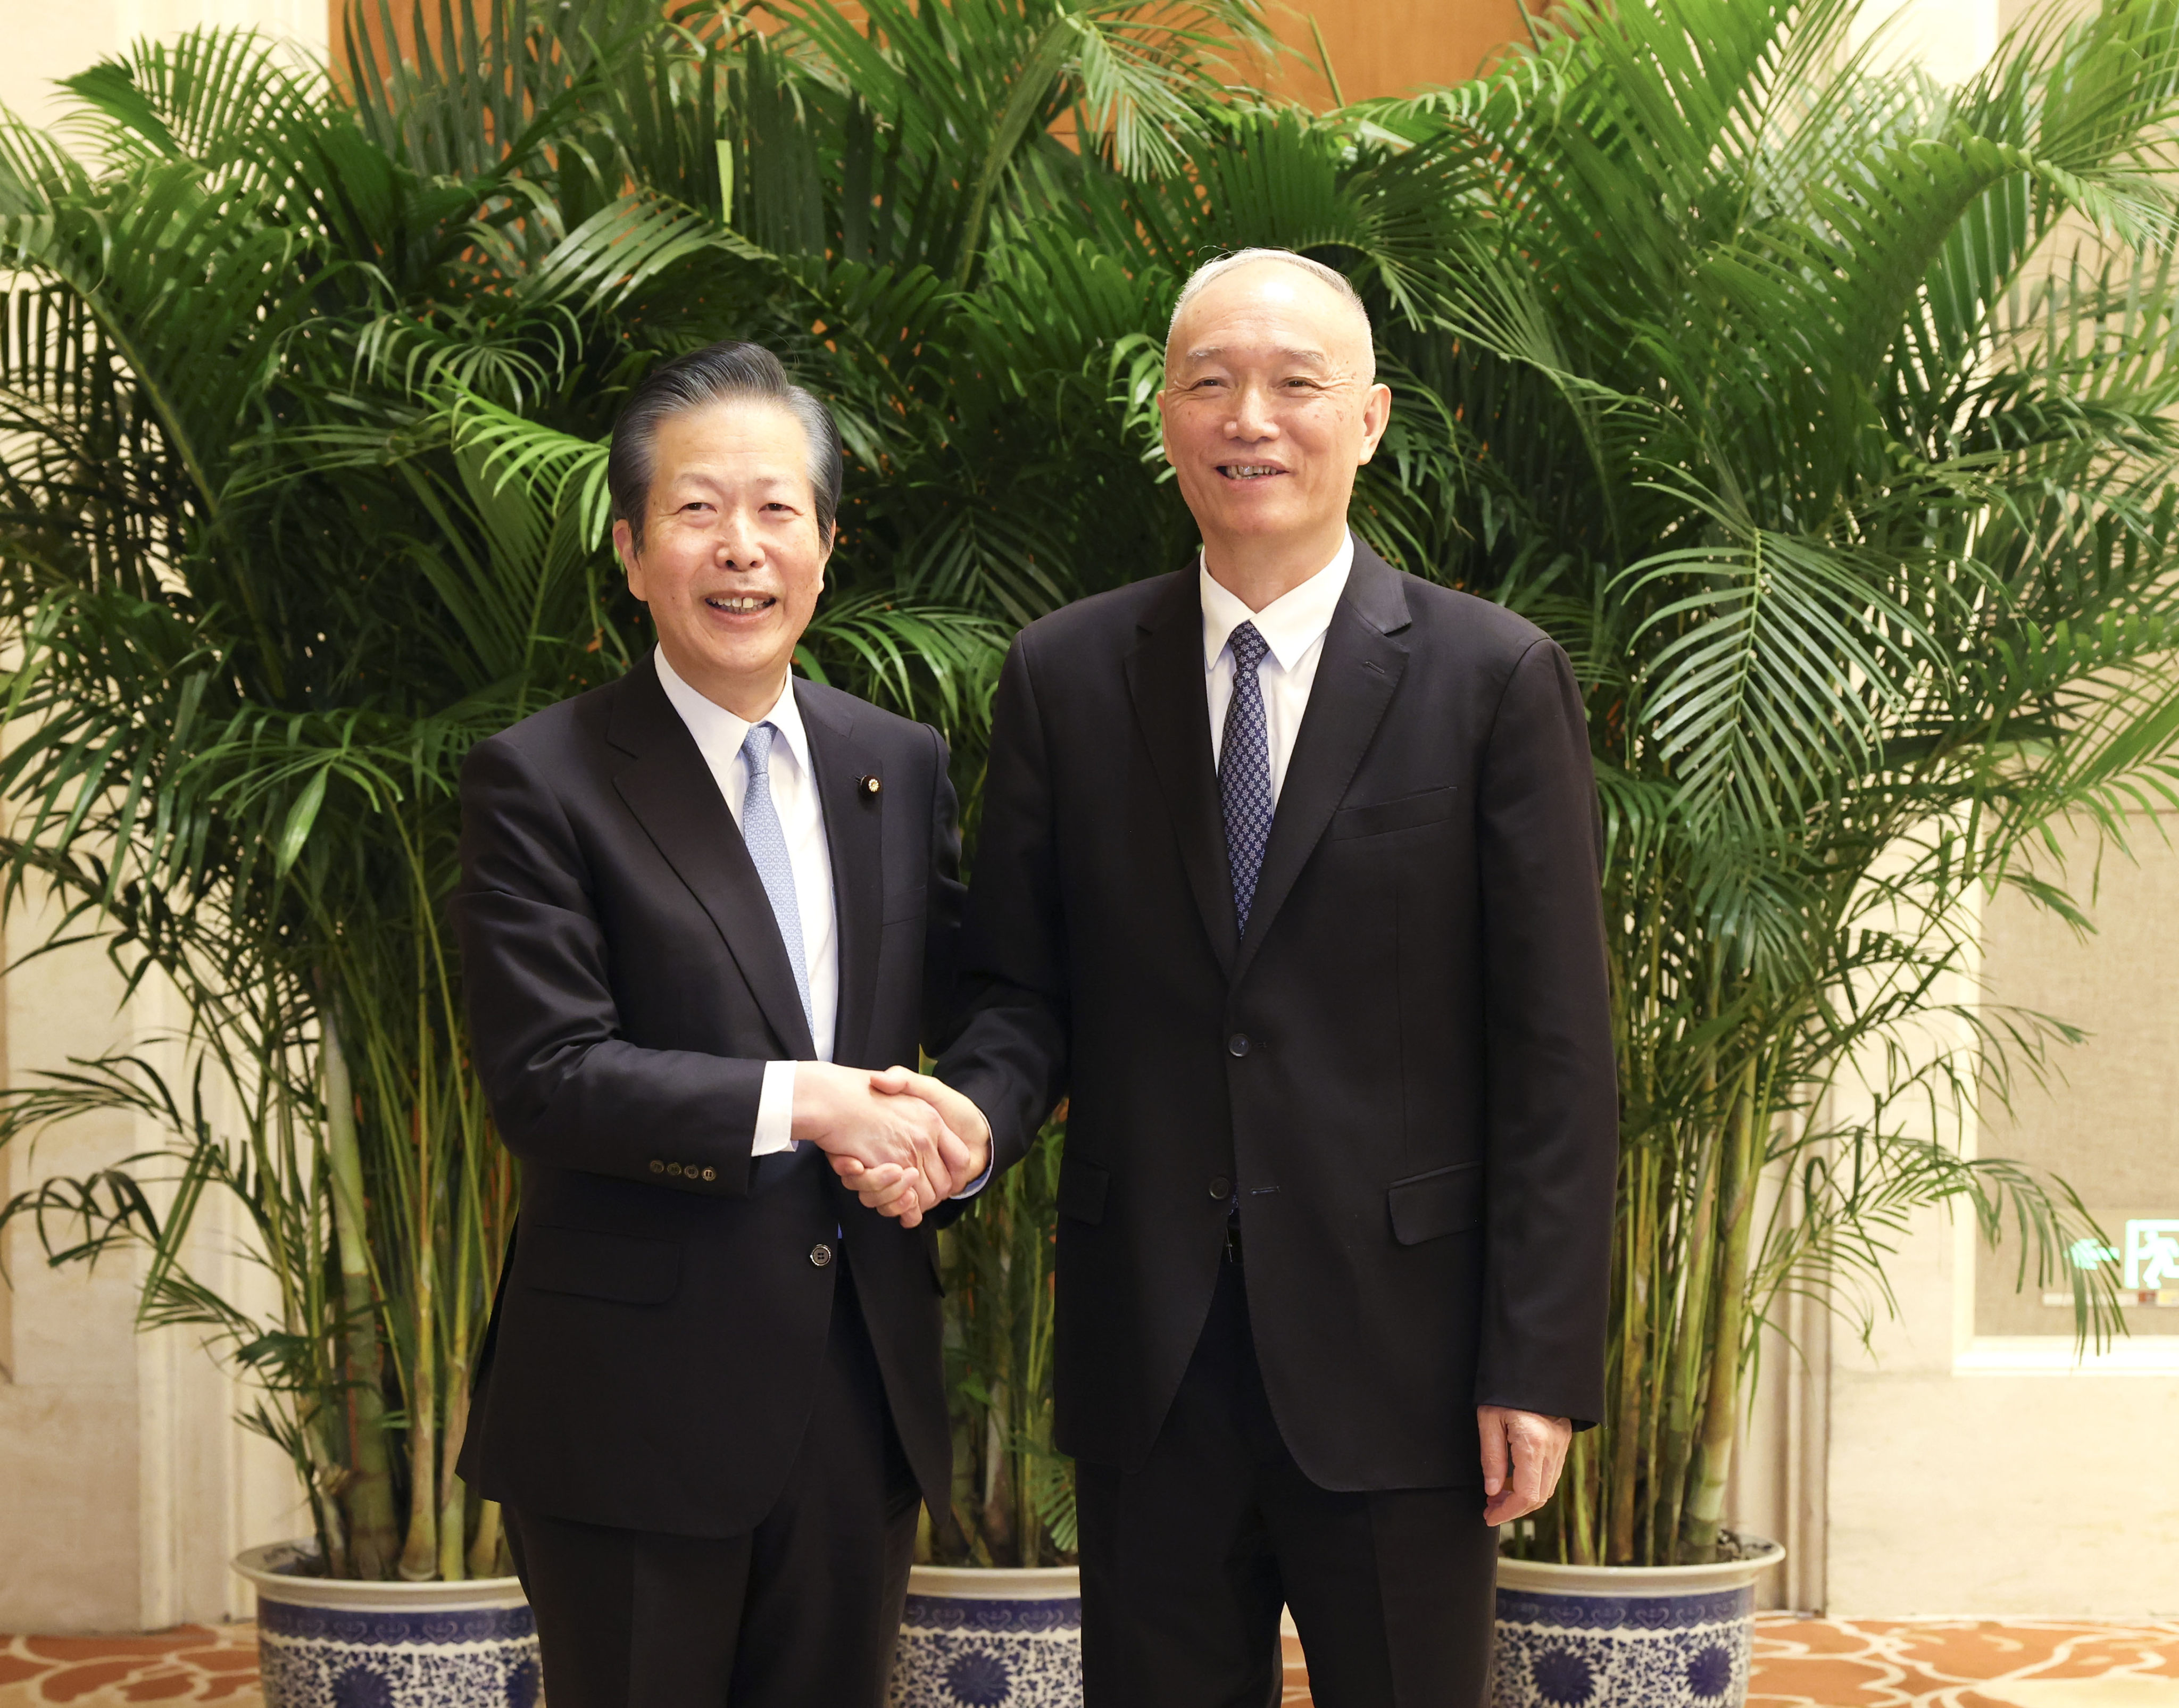 High ranking Chinese official Cai Qi (right), met a delegation led by Natsuo Yamaguchi, leader of Japan’s ruling coalition partner, the Komeito Party, in Beijing on Wednesday. Photo: Xinhua